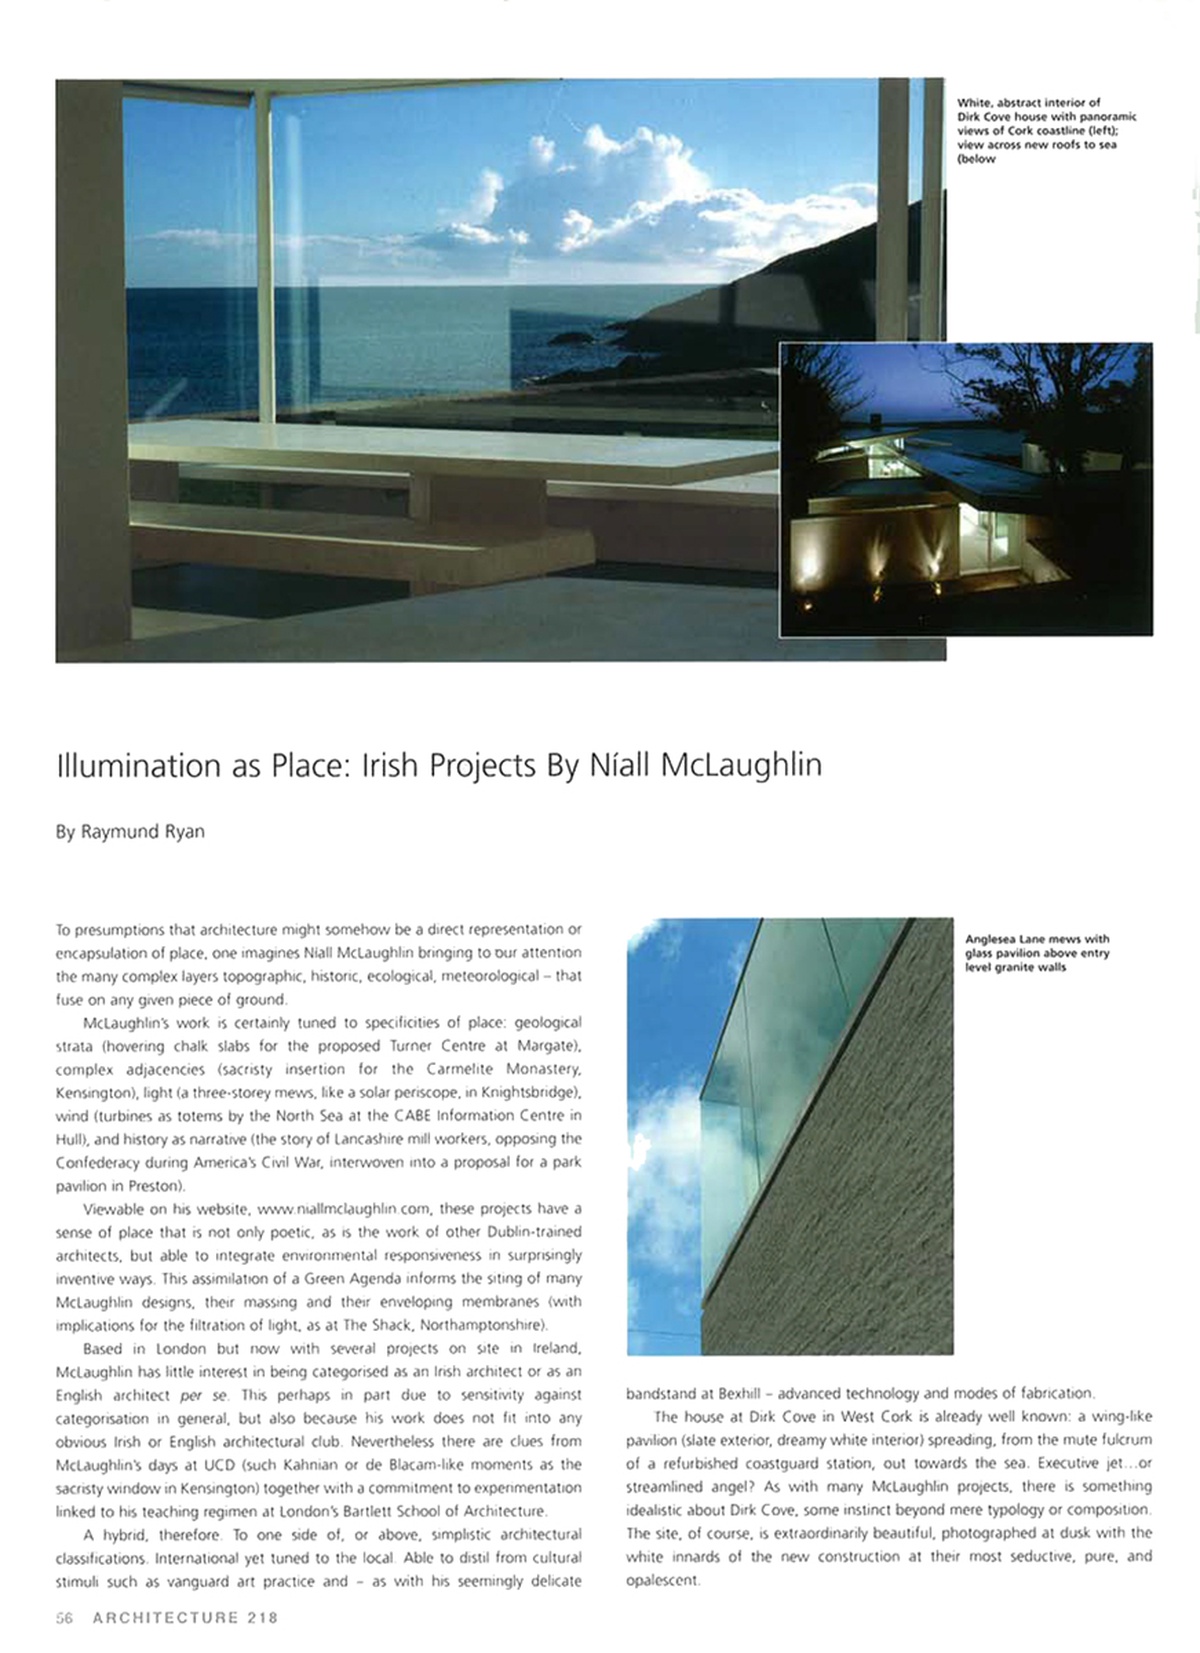 Illumination as Place, Irish Projects by Níall McLaughlin - Architecture Ireland